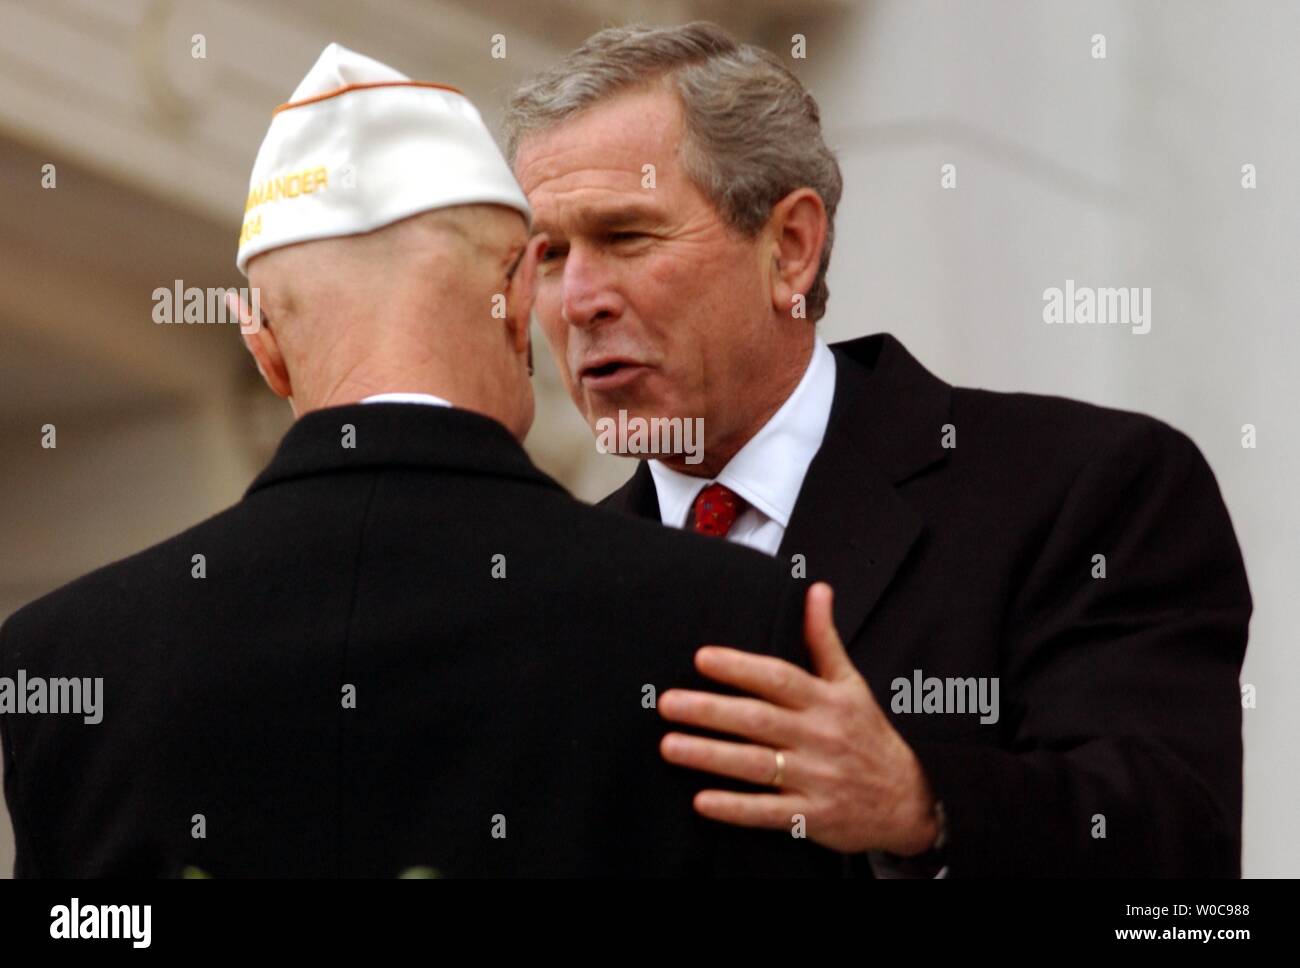 President George W. Bush congradulates David Berger, National Commander of the Army and Navy Union, after his speach during a memorial ceremony near the tomb of the unknown soldier on Veterans Day, November 11, 2003 in Arlington National Cemetery in Arlington, Virgina. (UPI/Michael Kleinfeld) Stock Photo